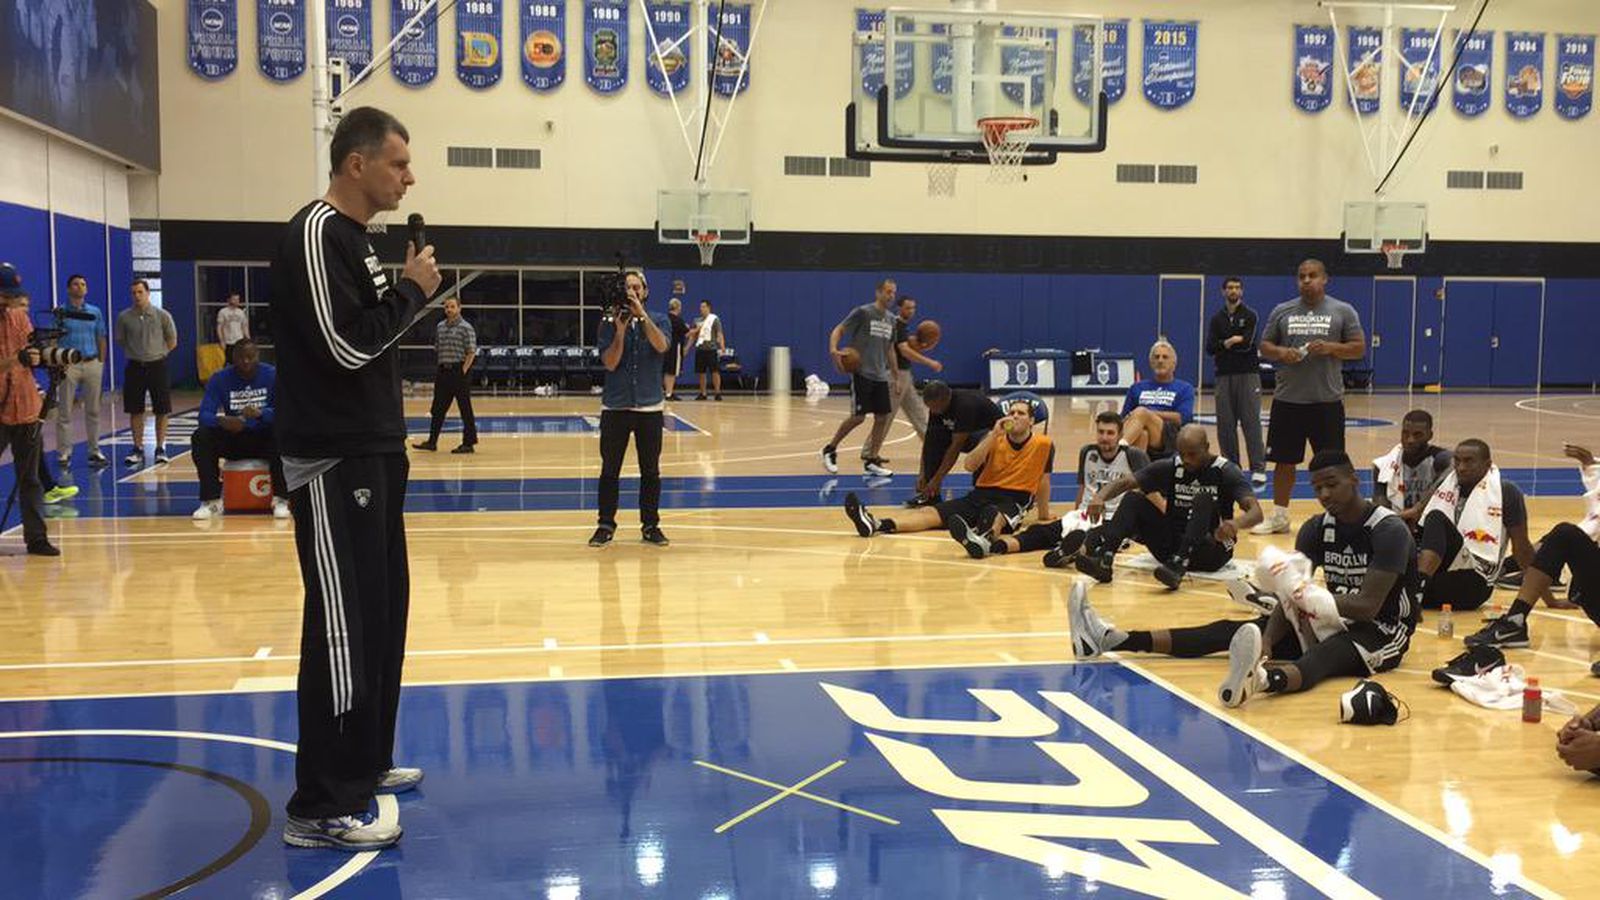 In surprise training session, Mikhail Prokhorov instructs